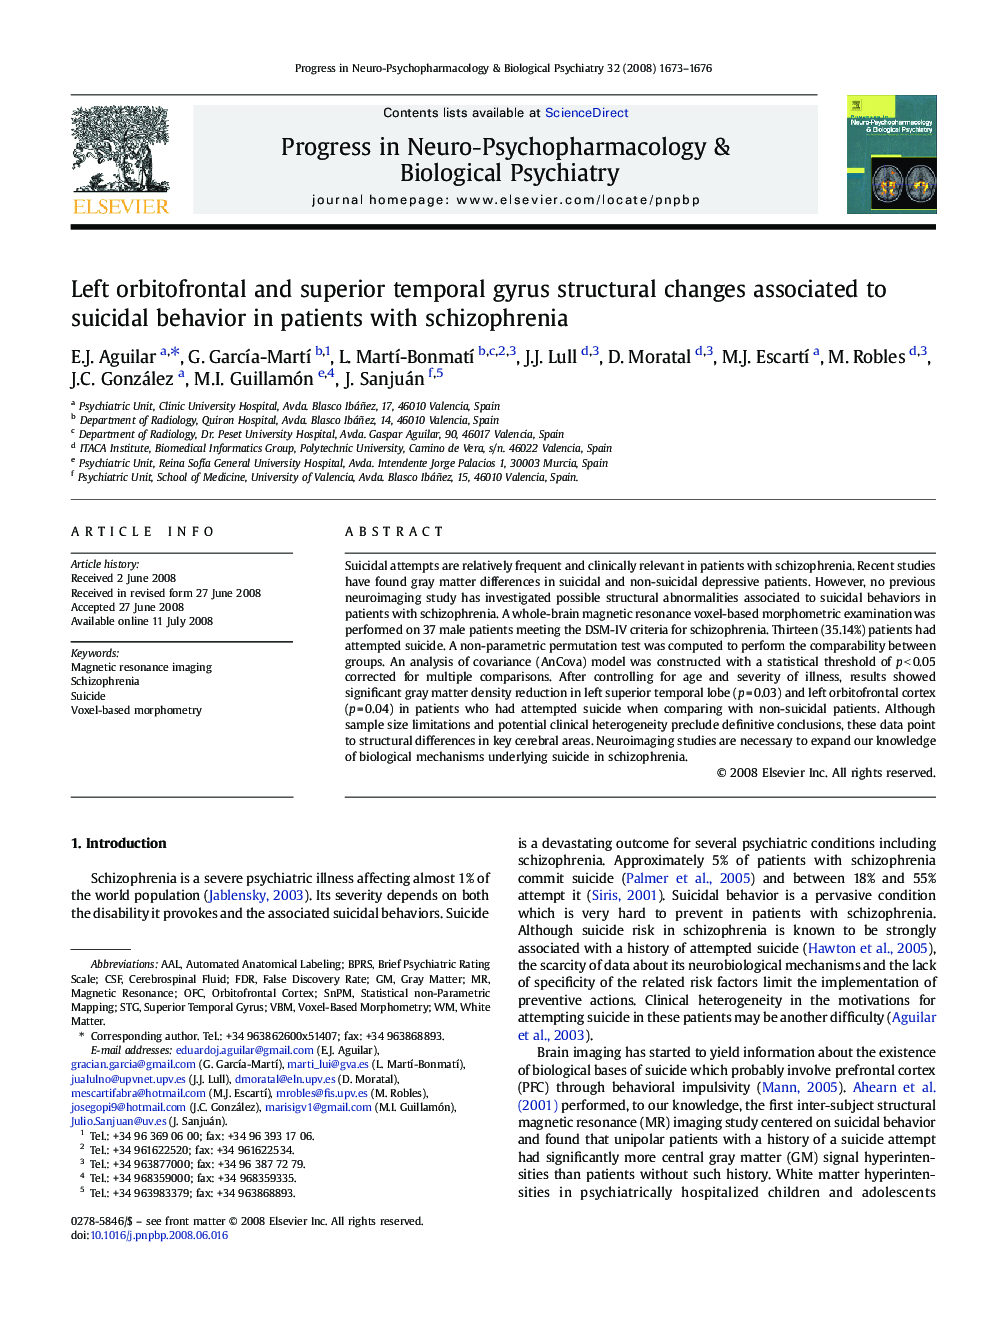 Left orbitofrontal and superior temporal gyrus structural changes associated to suicidal behavior in patients with schizophrenia